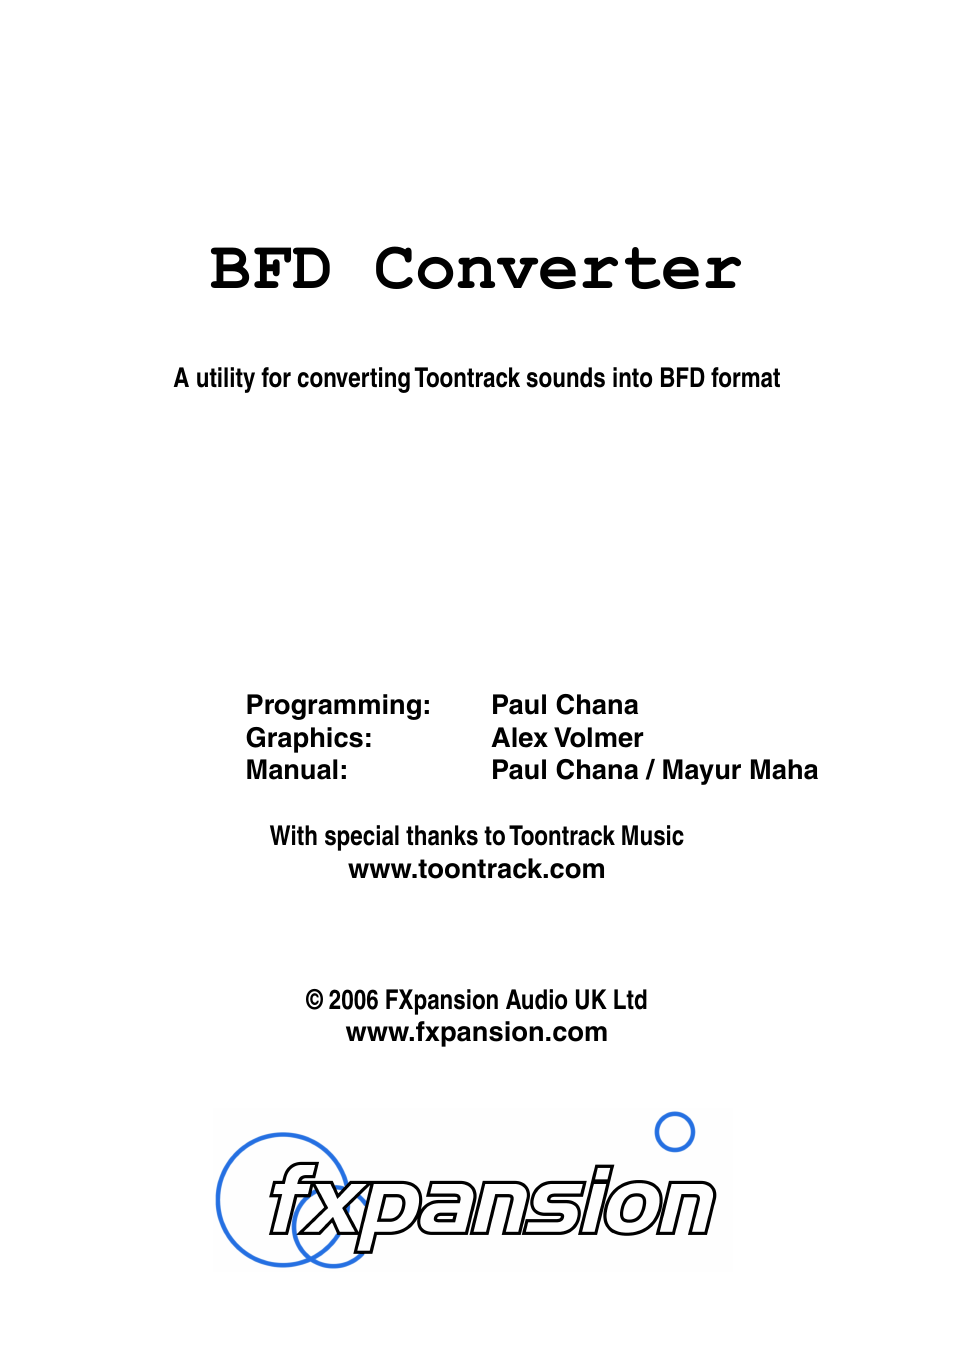 BFD Converter